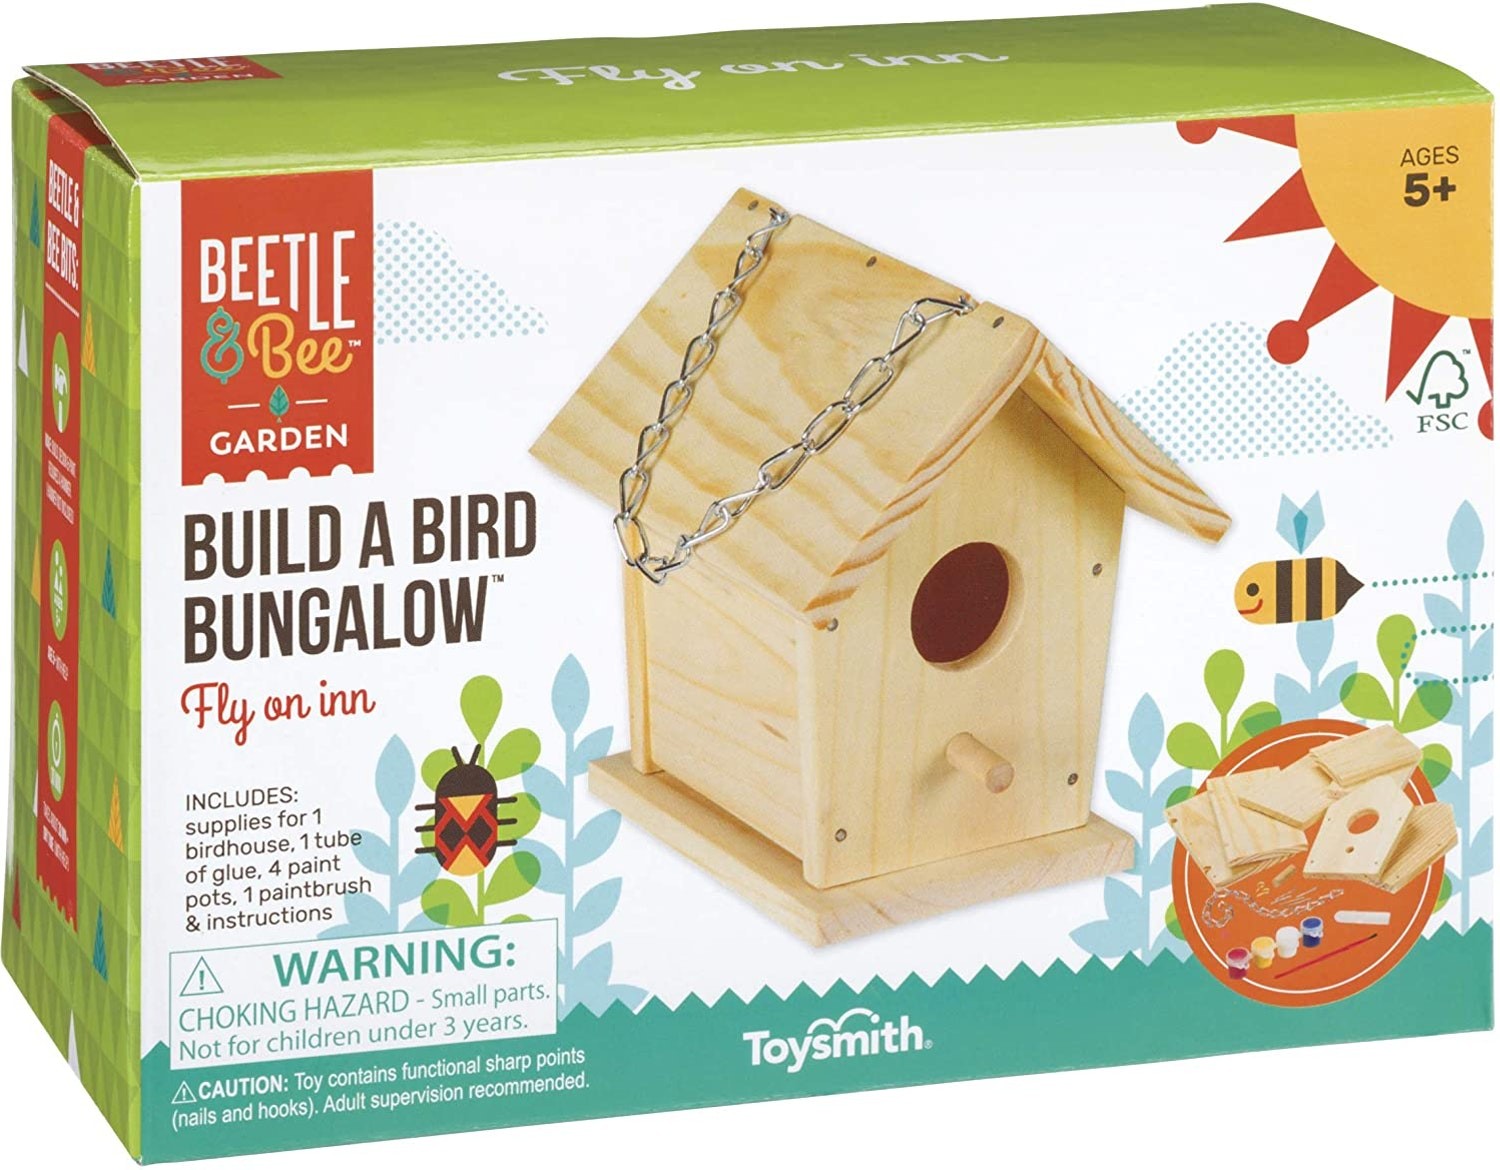 Build a Bird Bungalow is a kit for creating backyard birdhouses.